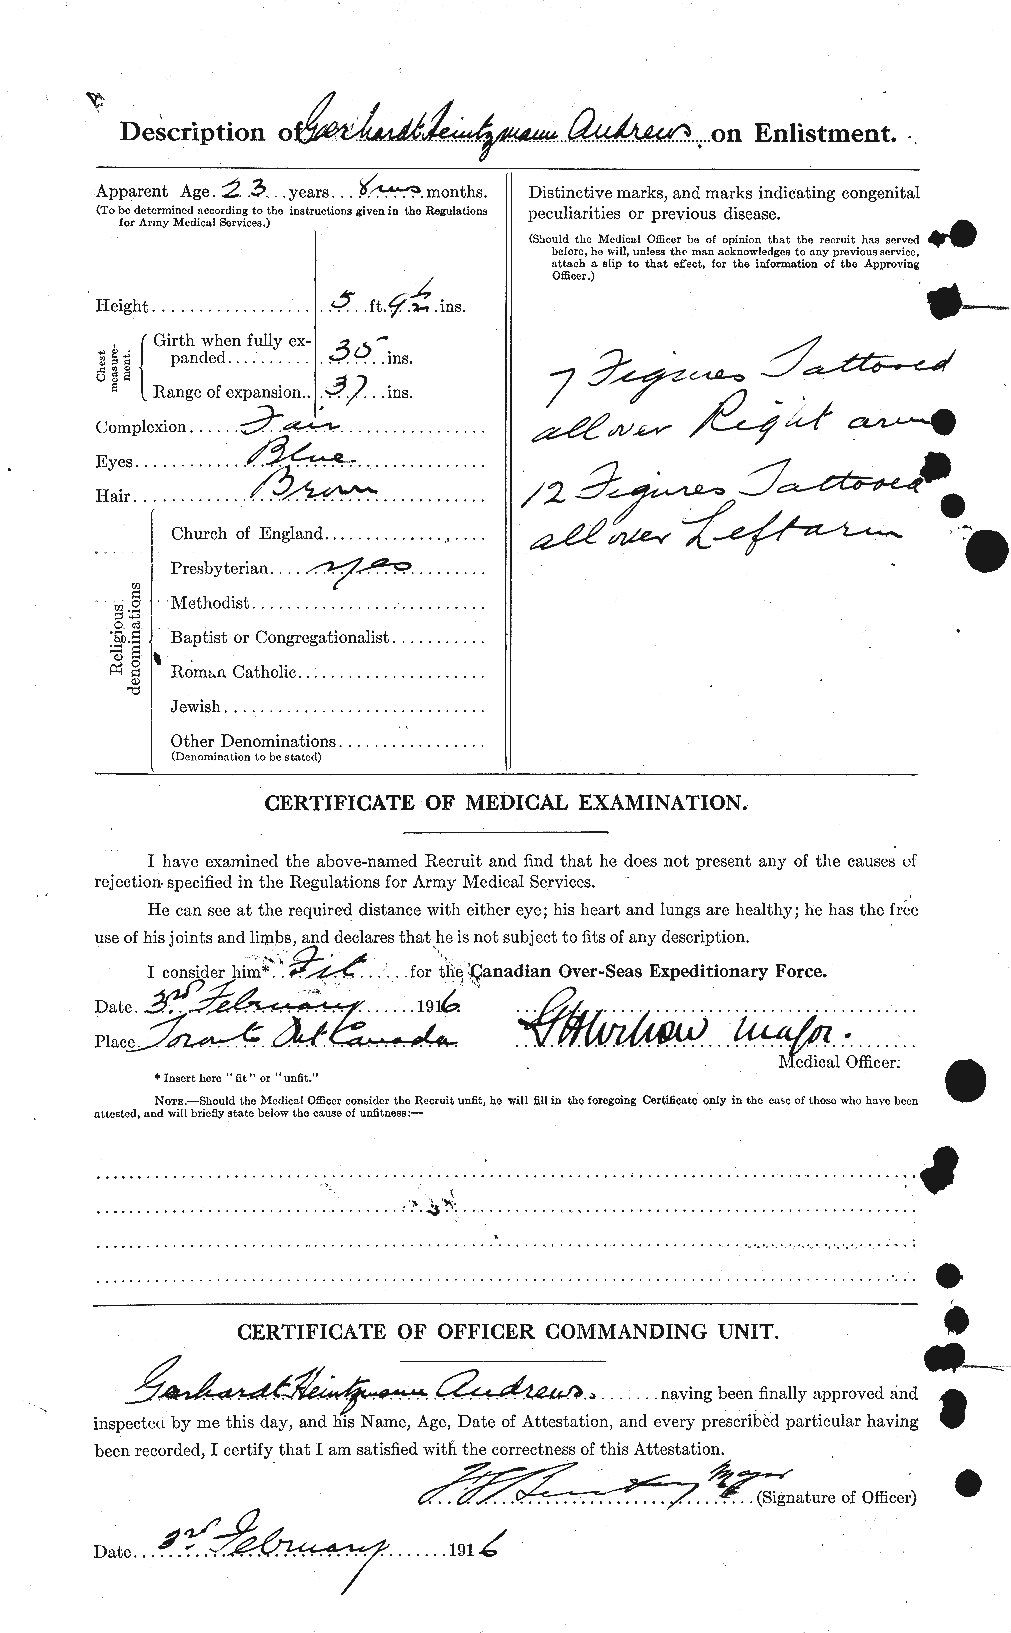 Personnel Records of the First World War - CEF 210306b